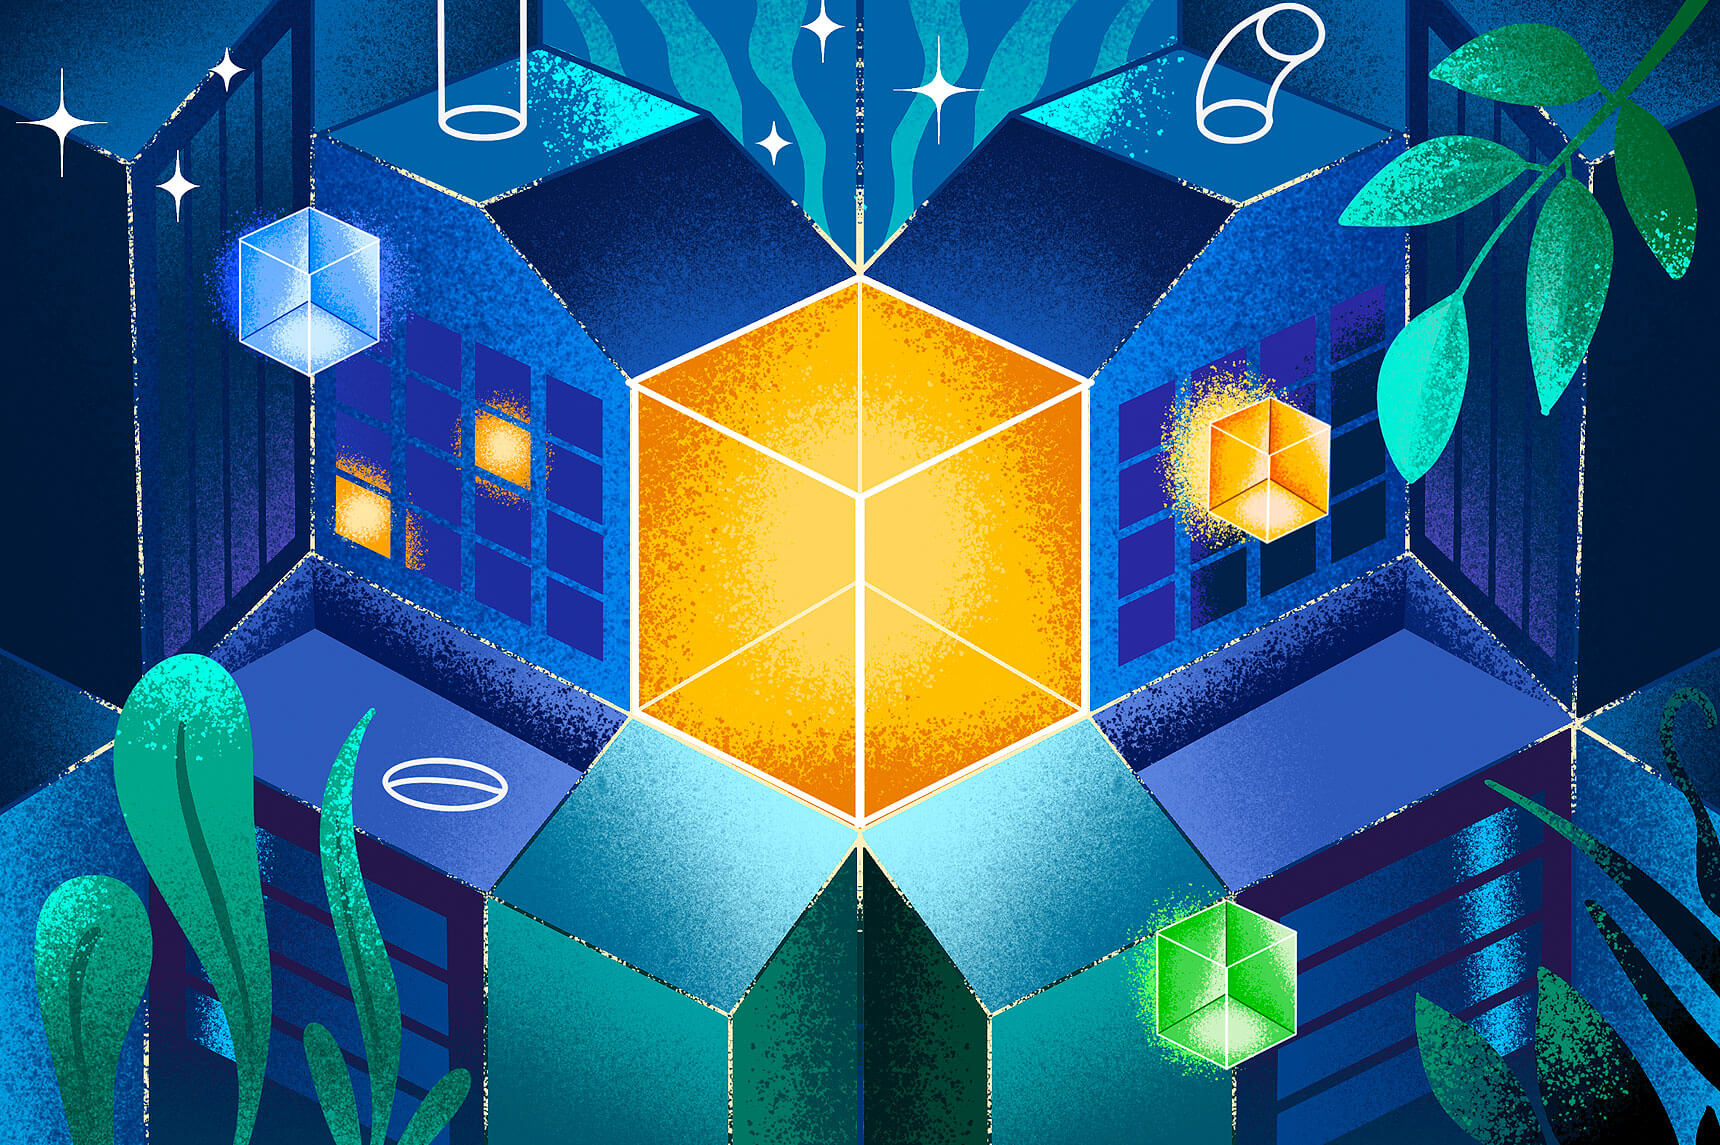 A graphic illustration of a glowing golden cube with buildings protruding from it.